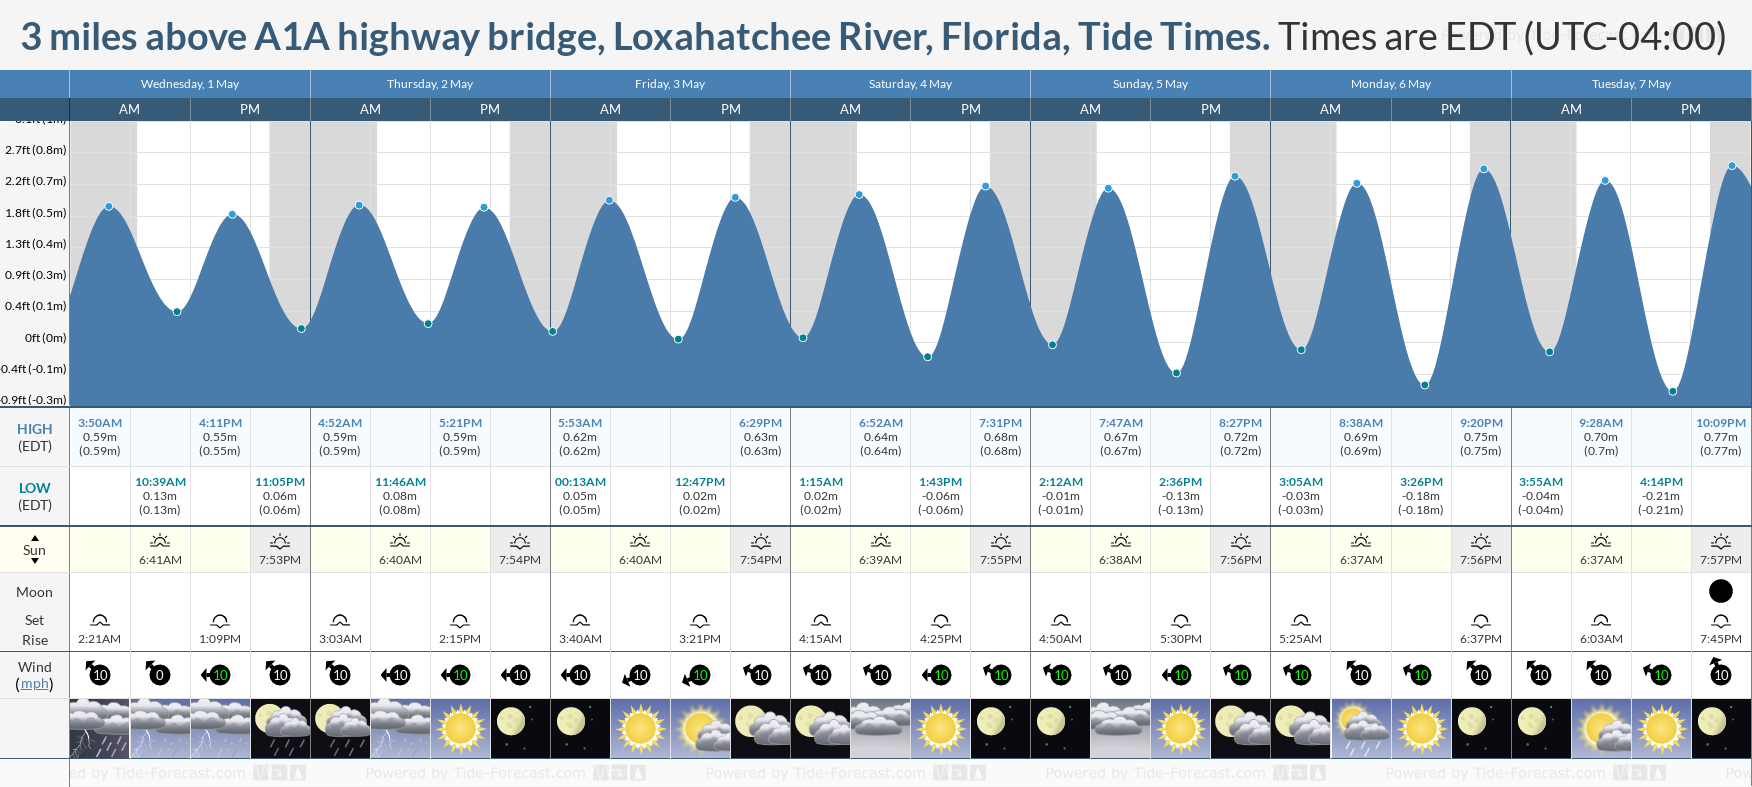 3 miles above A1A highway bridge, Loxahatchee River, Florida Tide Chart including high and low tide tide times for the next 7 days